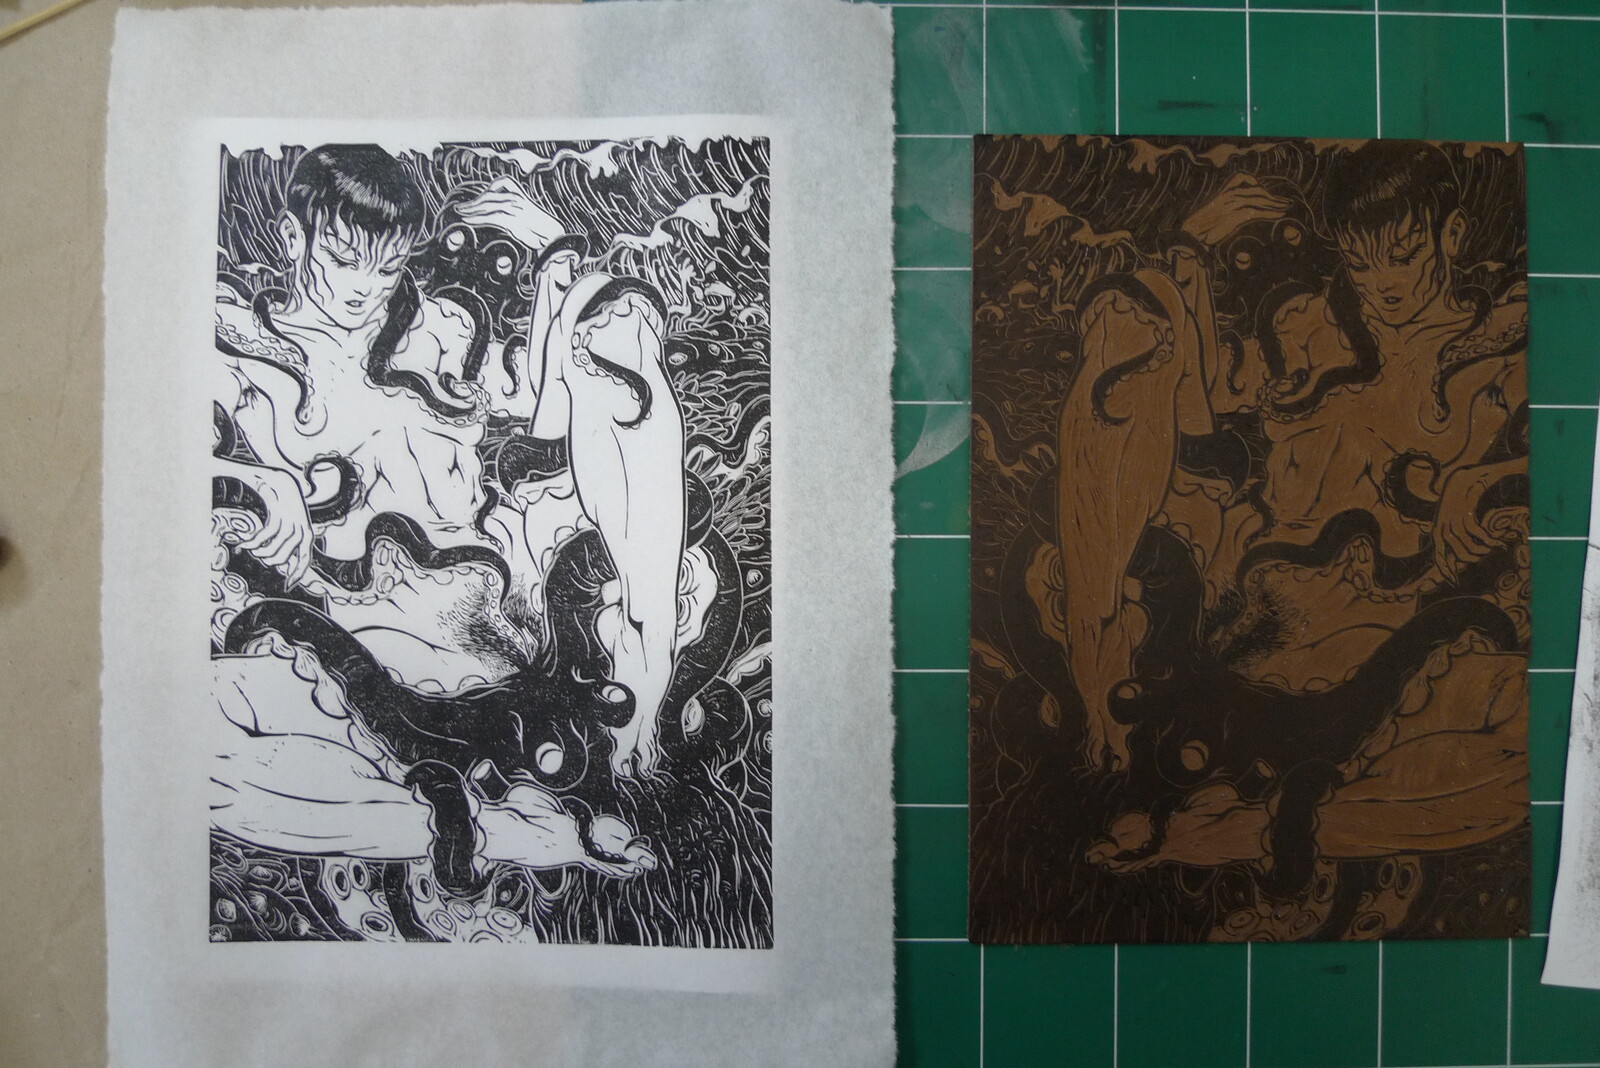 test print with the linocut